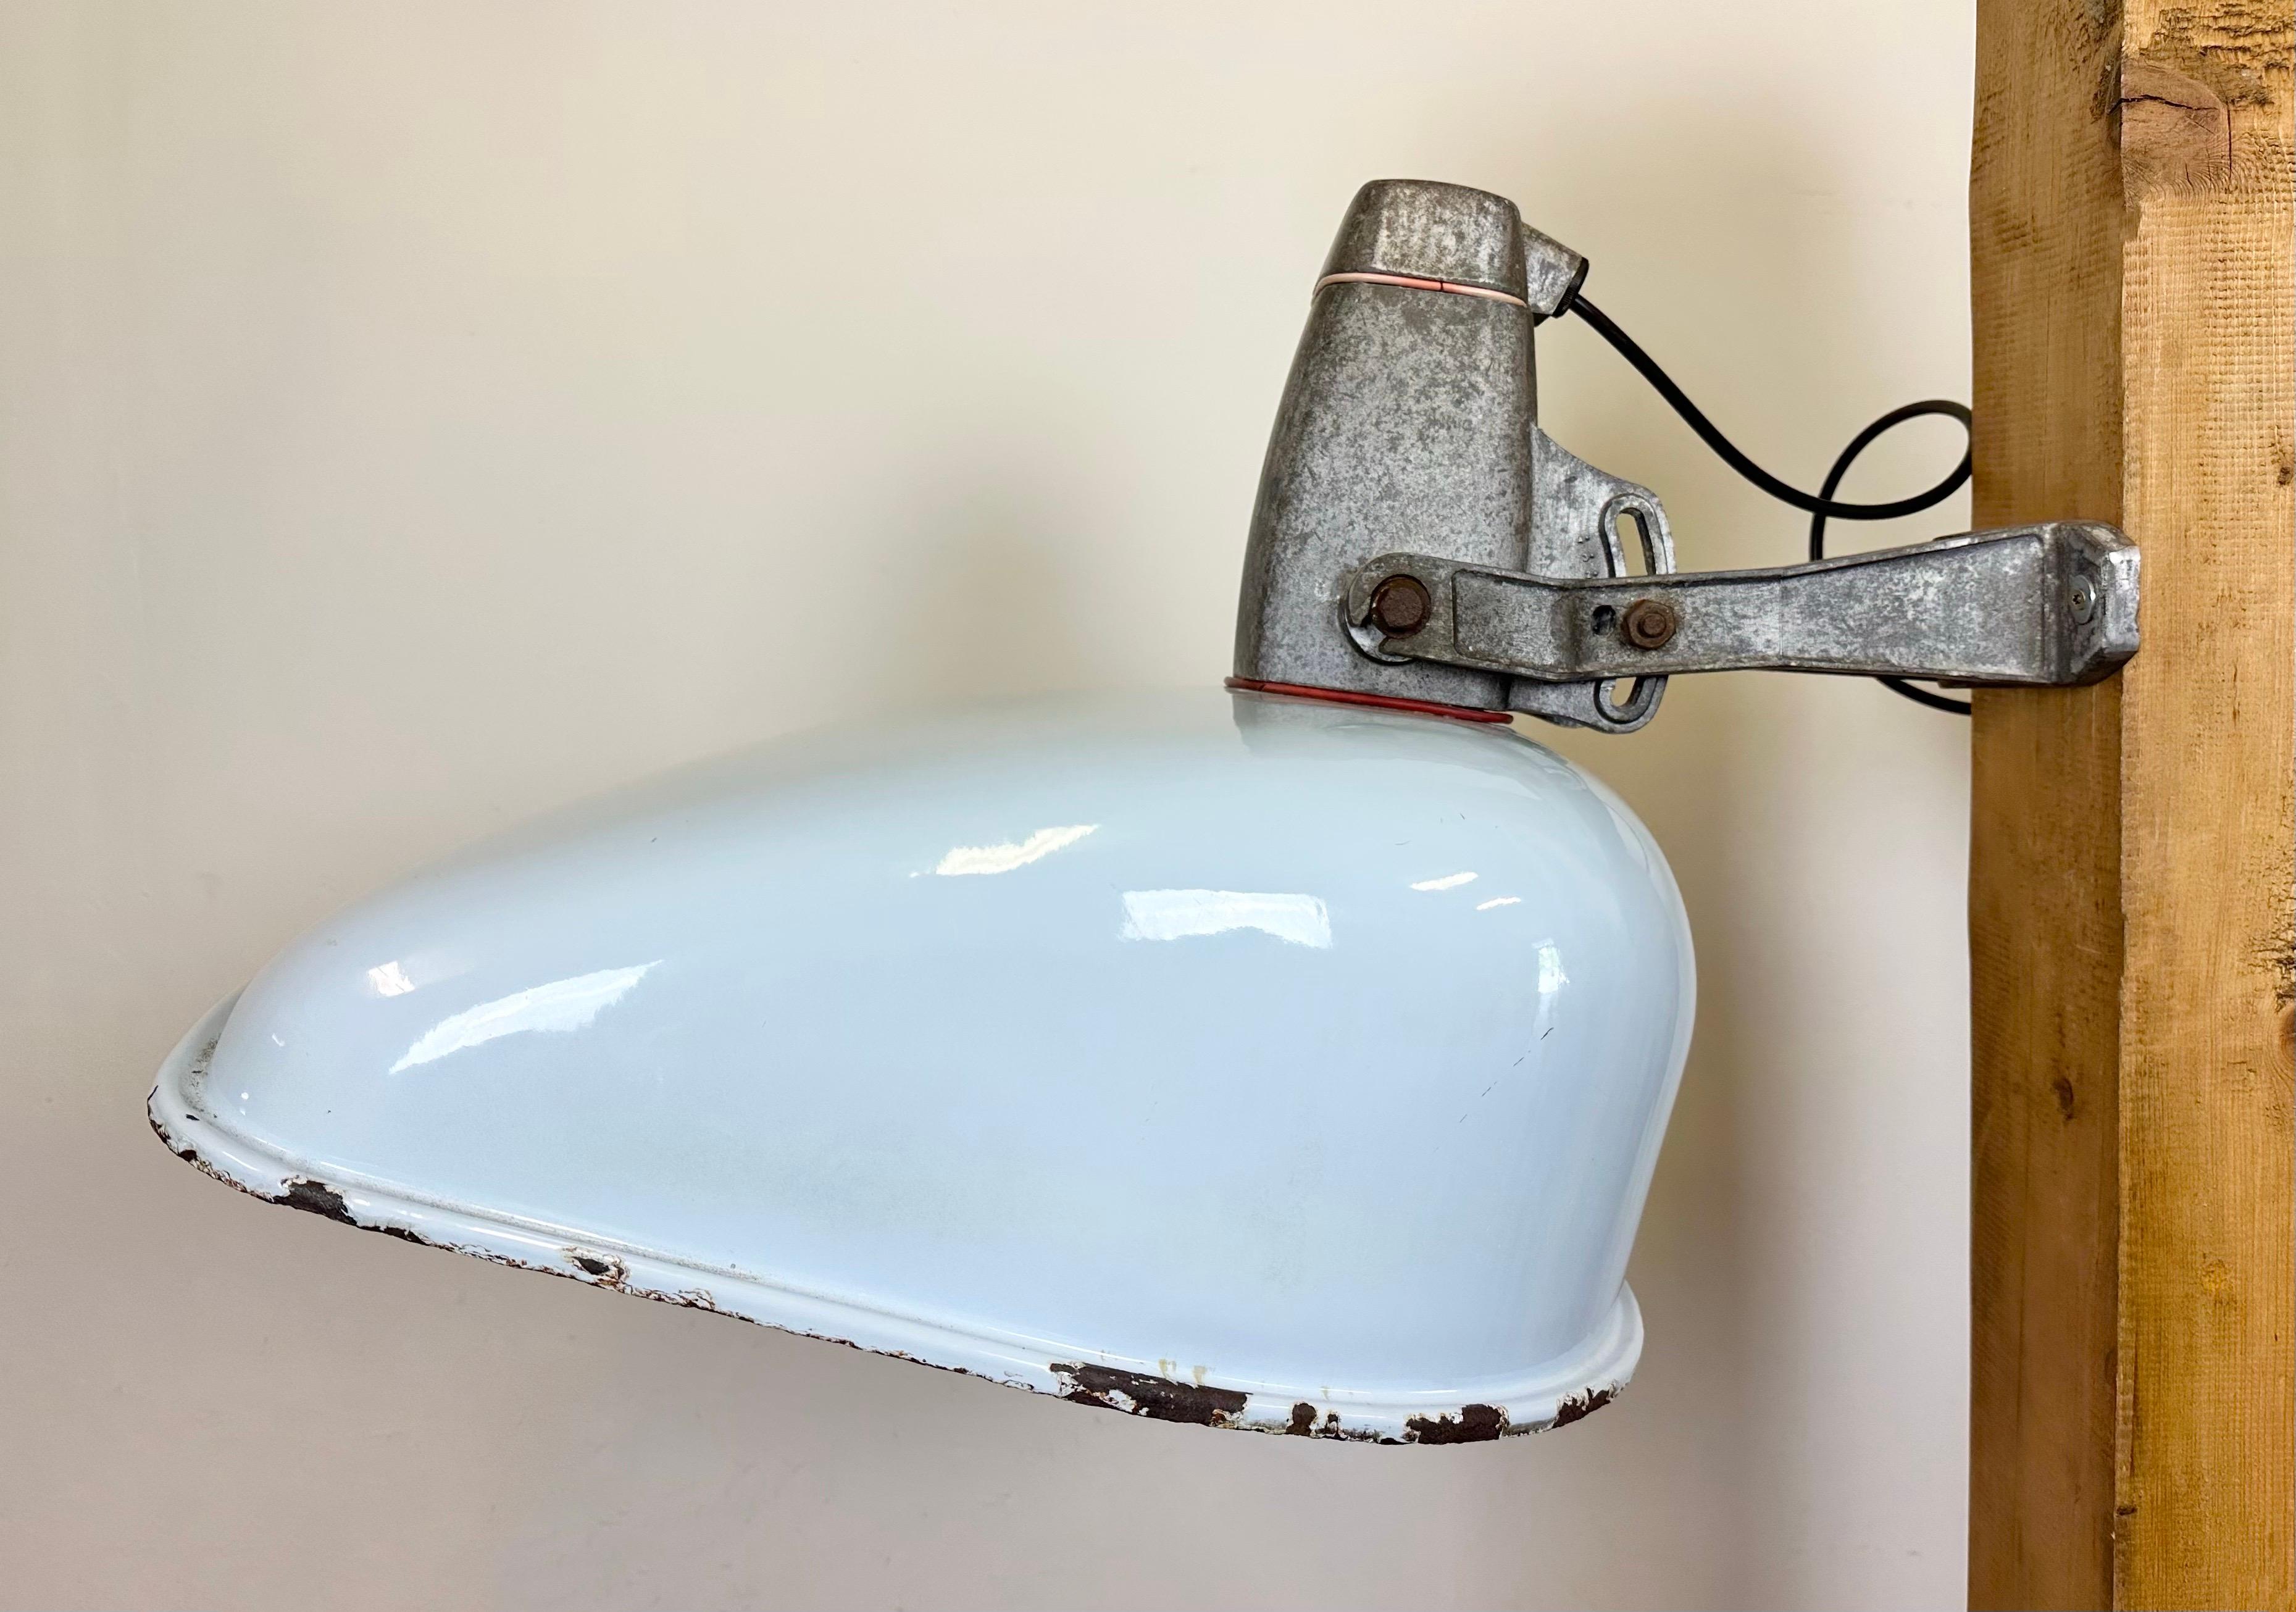 Industrial wall light with adjustable angle made in England during the 1960s. It features a light grey enamel shade with white enamel interior and a cast aluminium wall mounting. The porcelain socket requires E27/E26 light bulbs. New